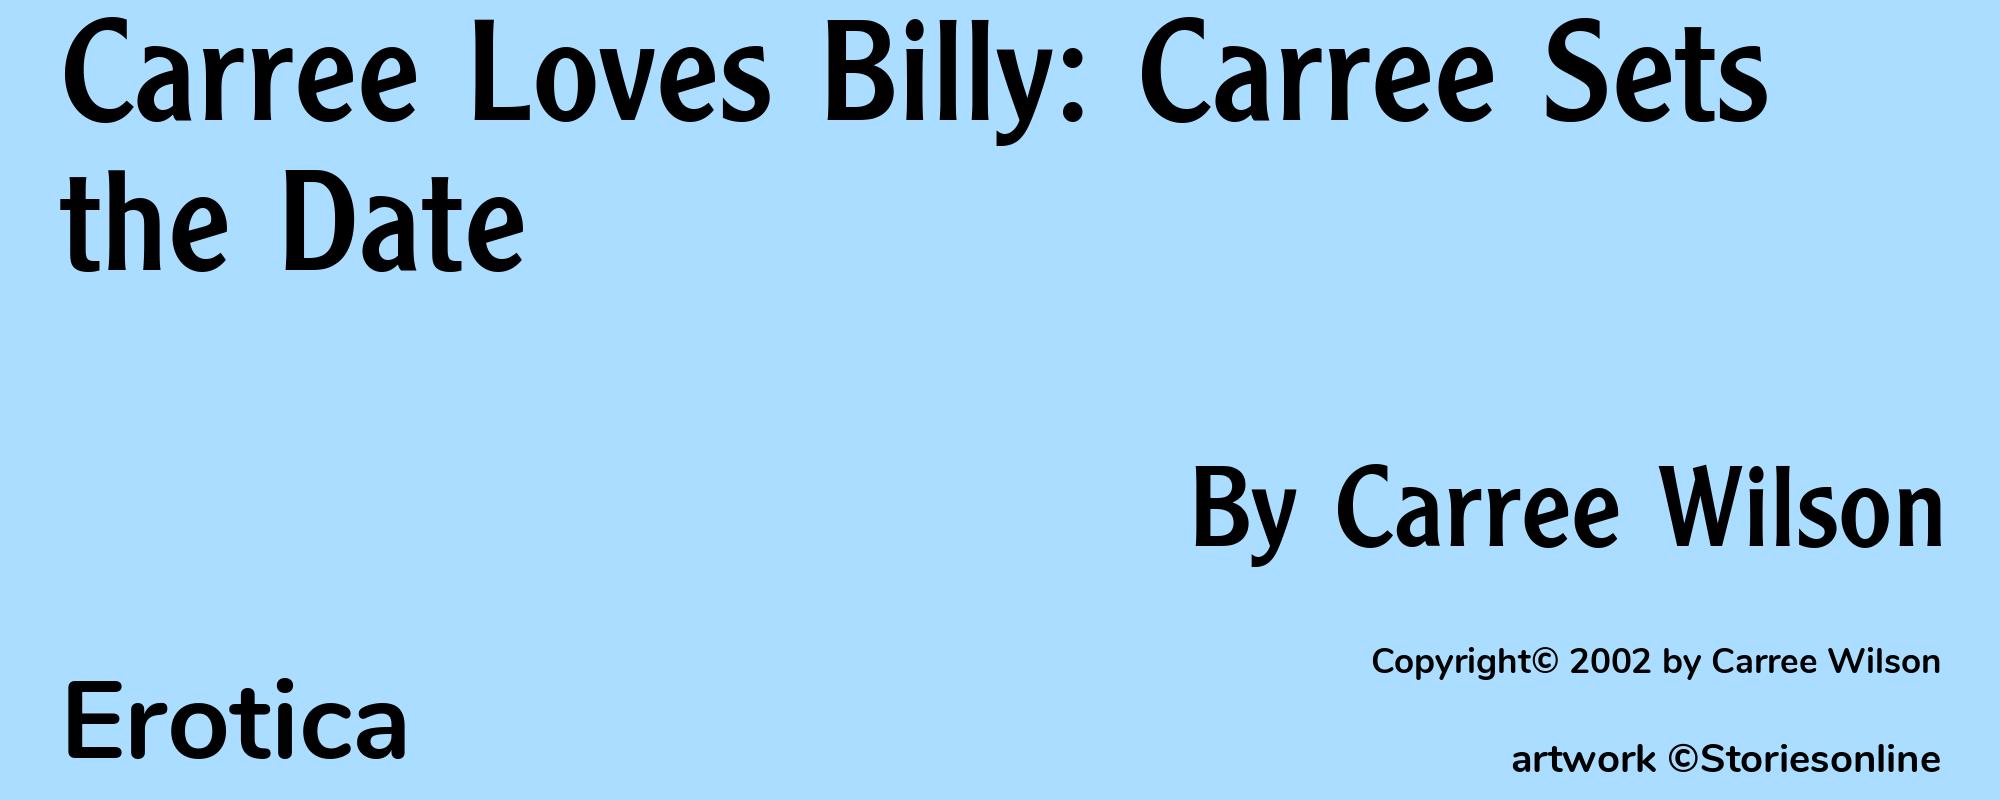 Carree Loves Billy: Carree Sets the Date - Cover